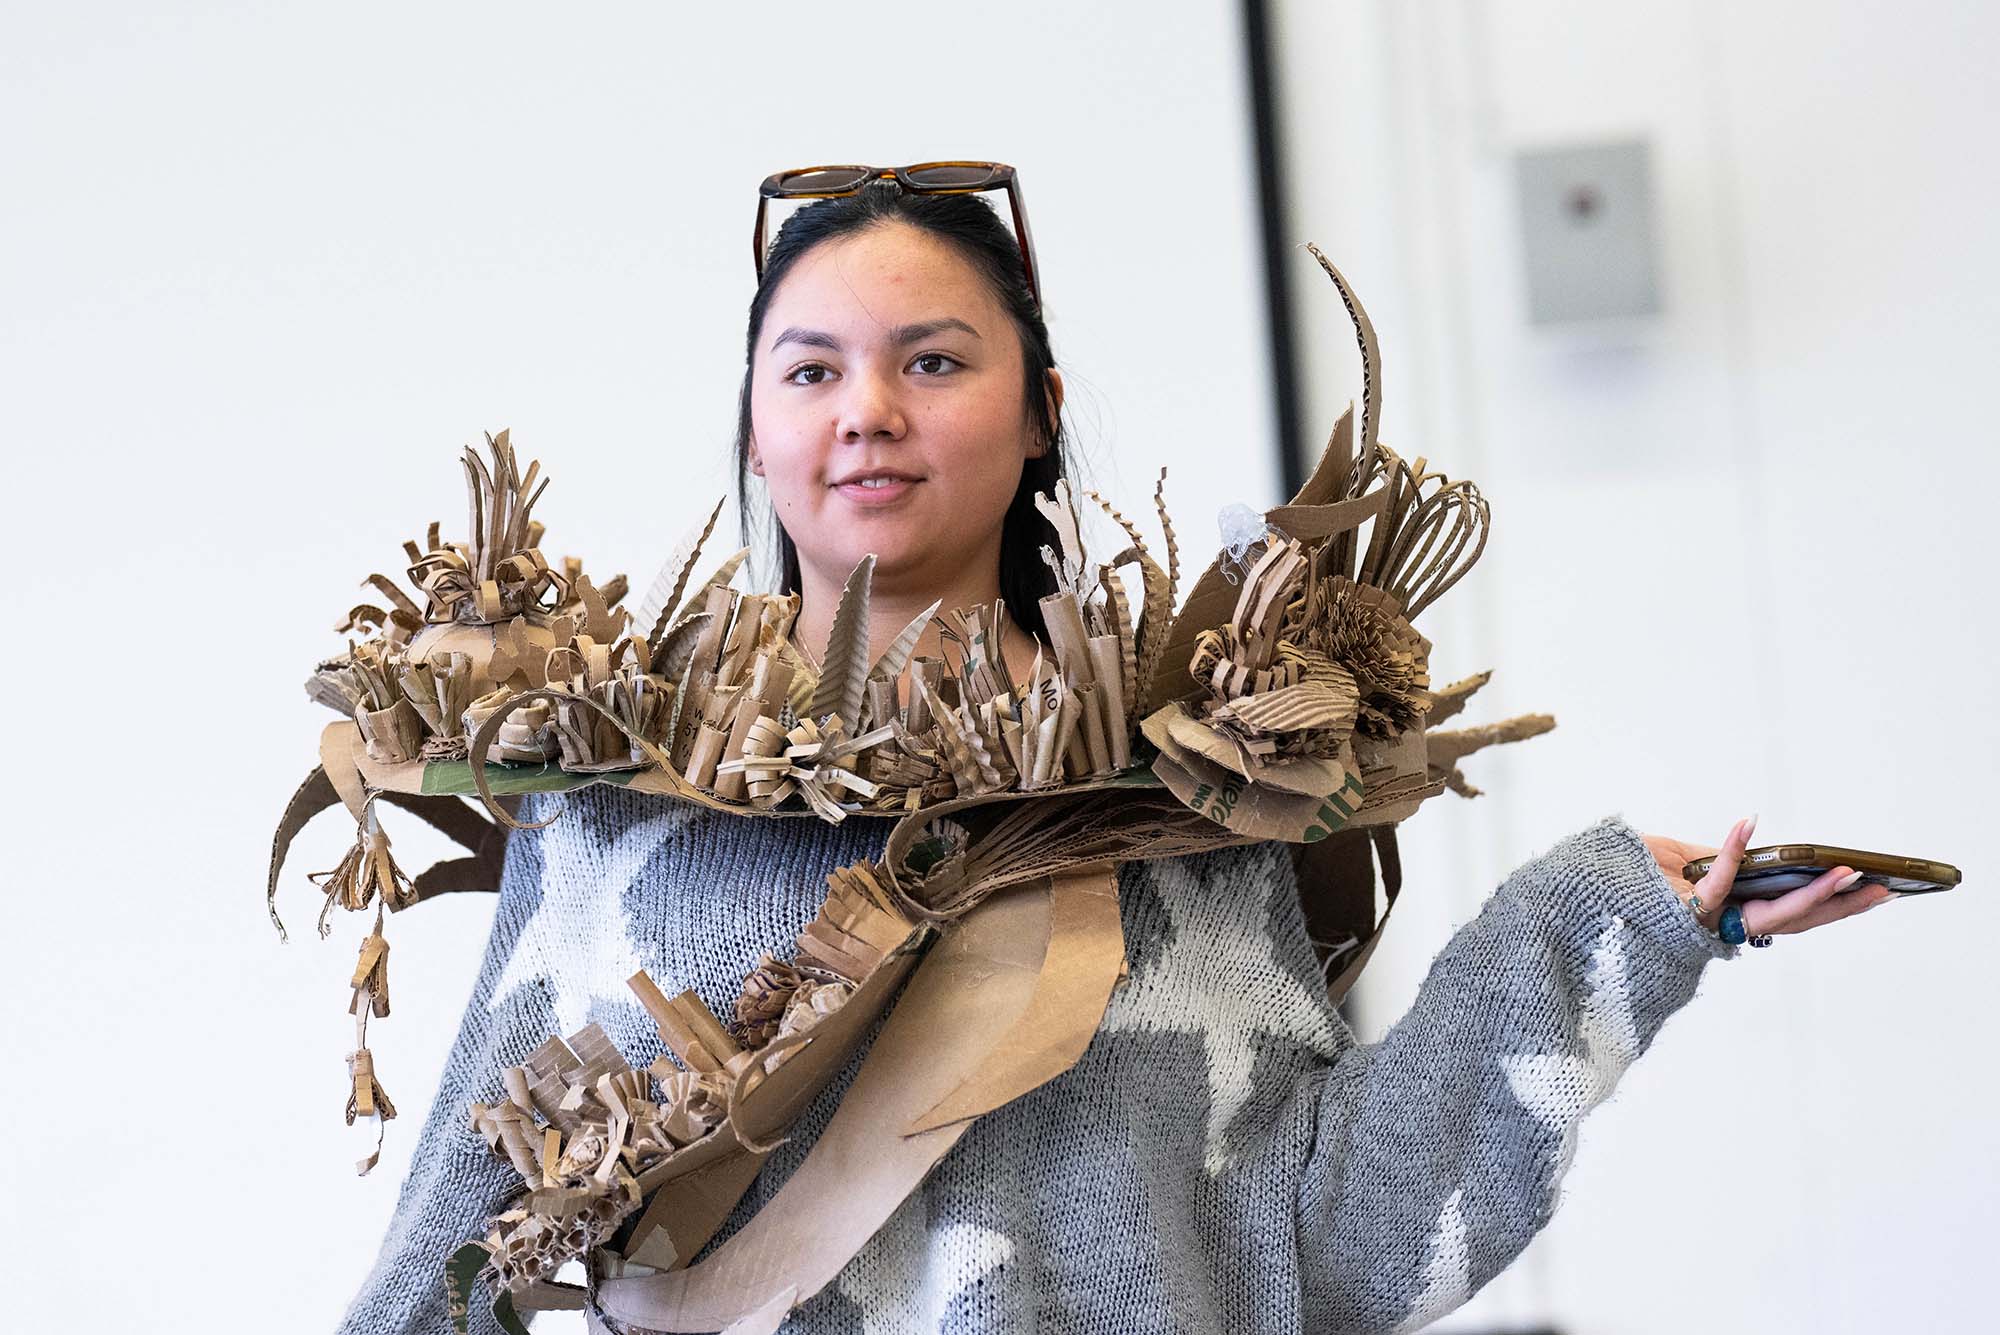 Photo: A picture of a girl wearing a gray sweater with white stars and a cardboard sculpture around her neck. The sculpture sits almost like a scarf and features 3D elements